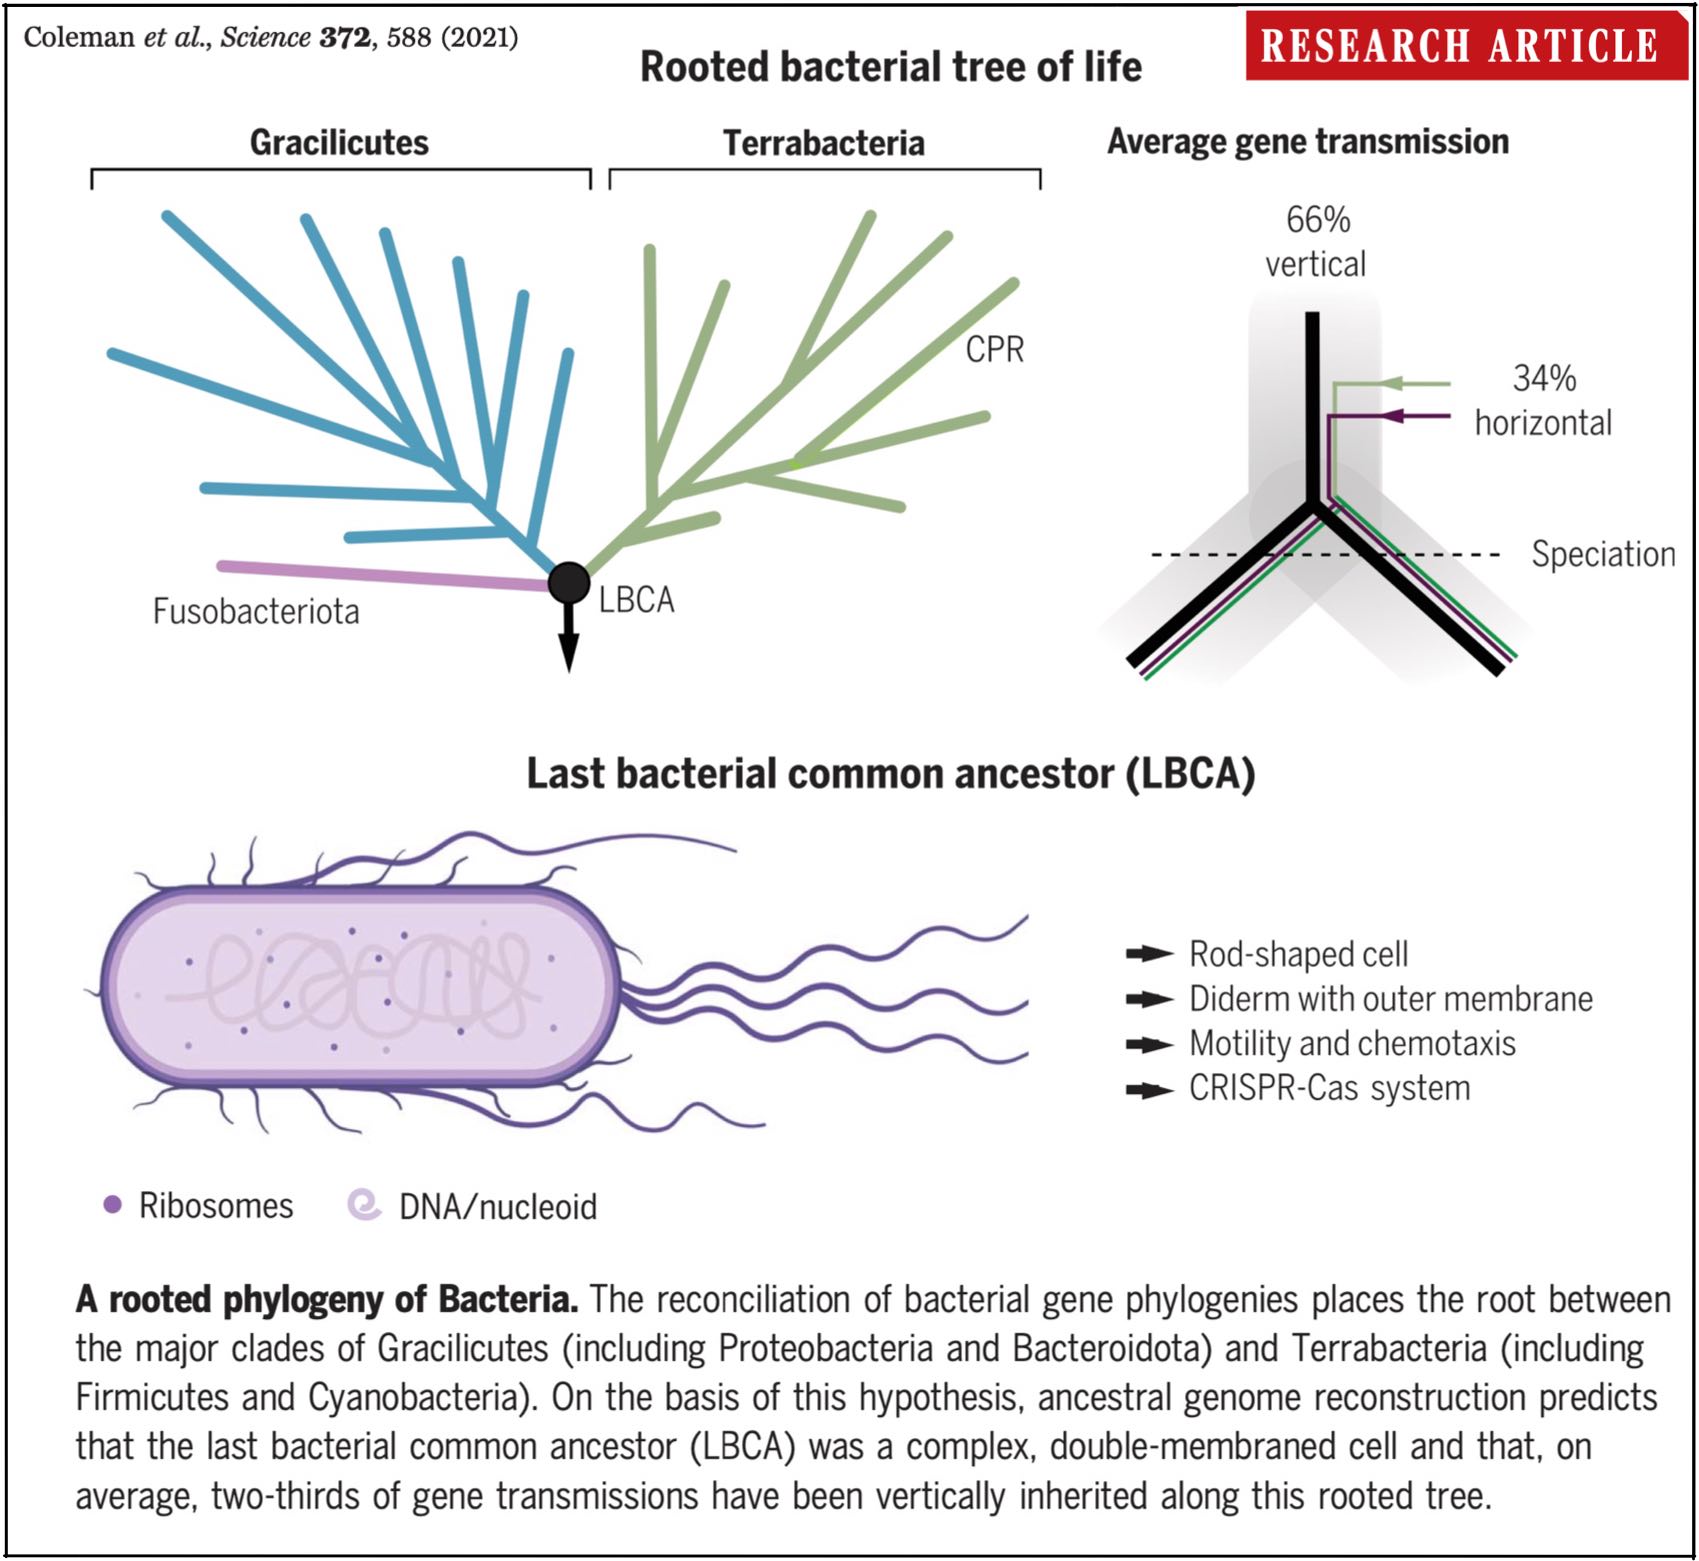 A rooted phylogeny of Bacteria. The reconciliation of bacterial gene phylogenies places the root between the major clades of Gracilicutes (including Proteobacteria and Bacteroidota) and Terrabacteria (including Firmicutes and Cyanobacteria). On the basis of this hypothesis, ancestral genome reconstruction predicts that the last bacterial common ancestor (LBCA) was a complex, double-membraned cell and that, on average, two-thirds of gene transmissions have been vertically inherited along this rooted tree.